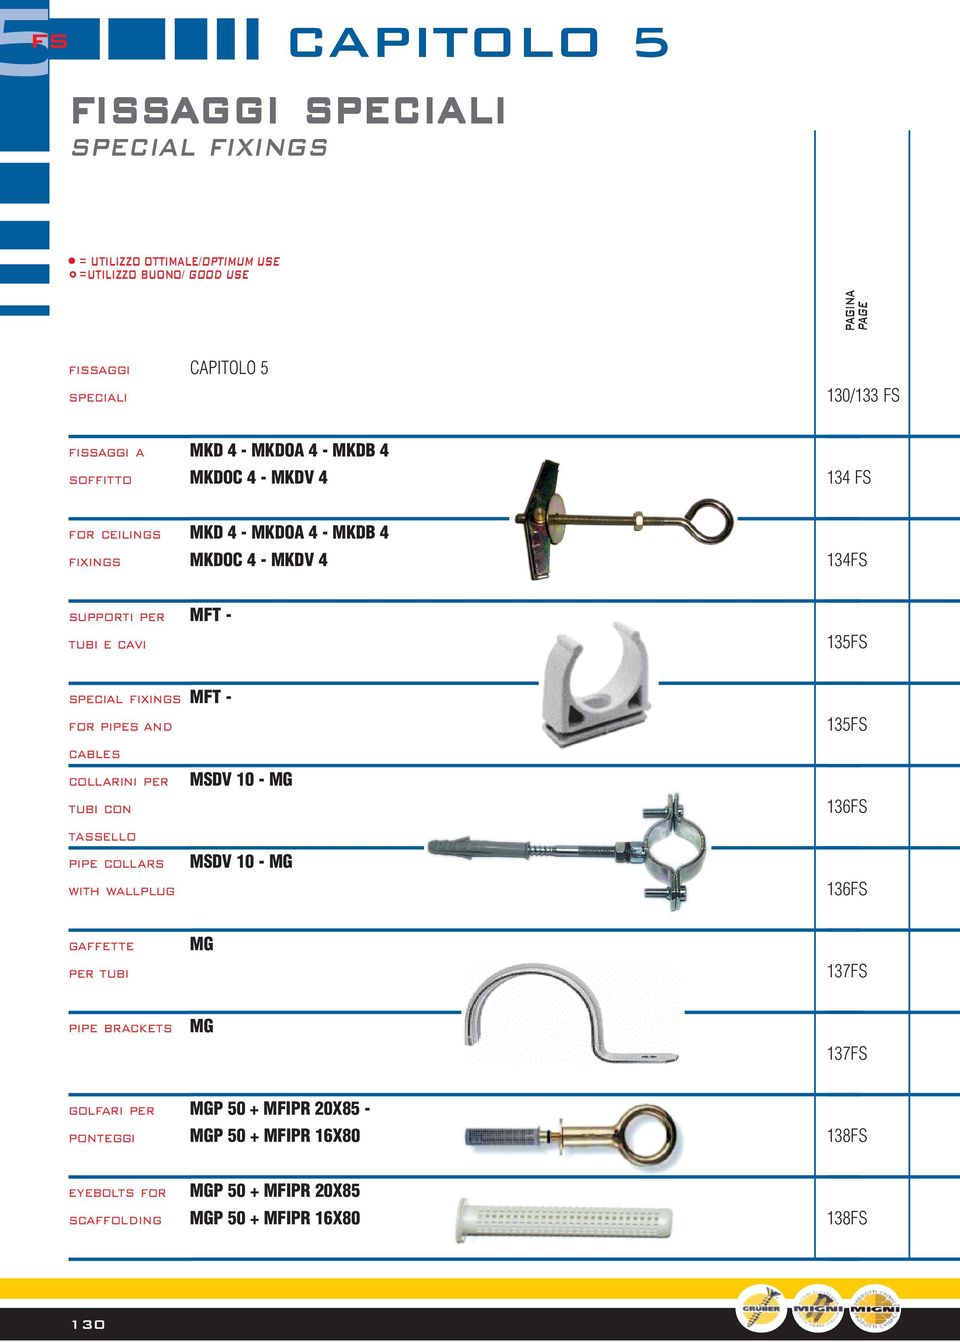 special fixings for pipes and cables collarini per tubi con tassello pipe collars with wallplug MFT - MSDV 10 - MG MSDV 10 - MG 135FS 136FS 136FS gaffette per tubi MG